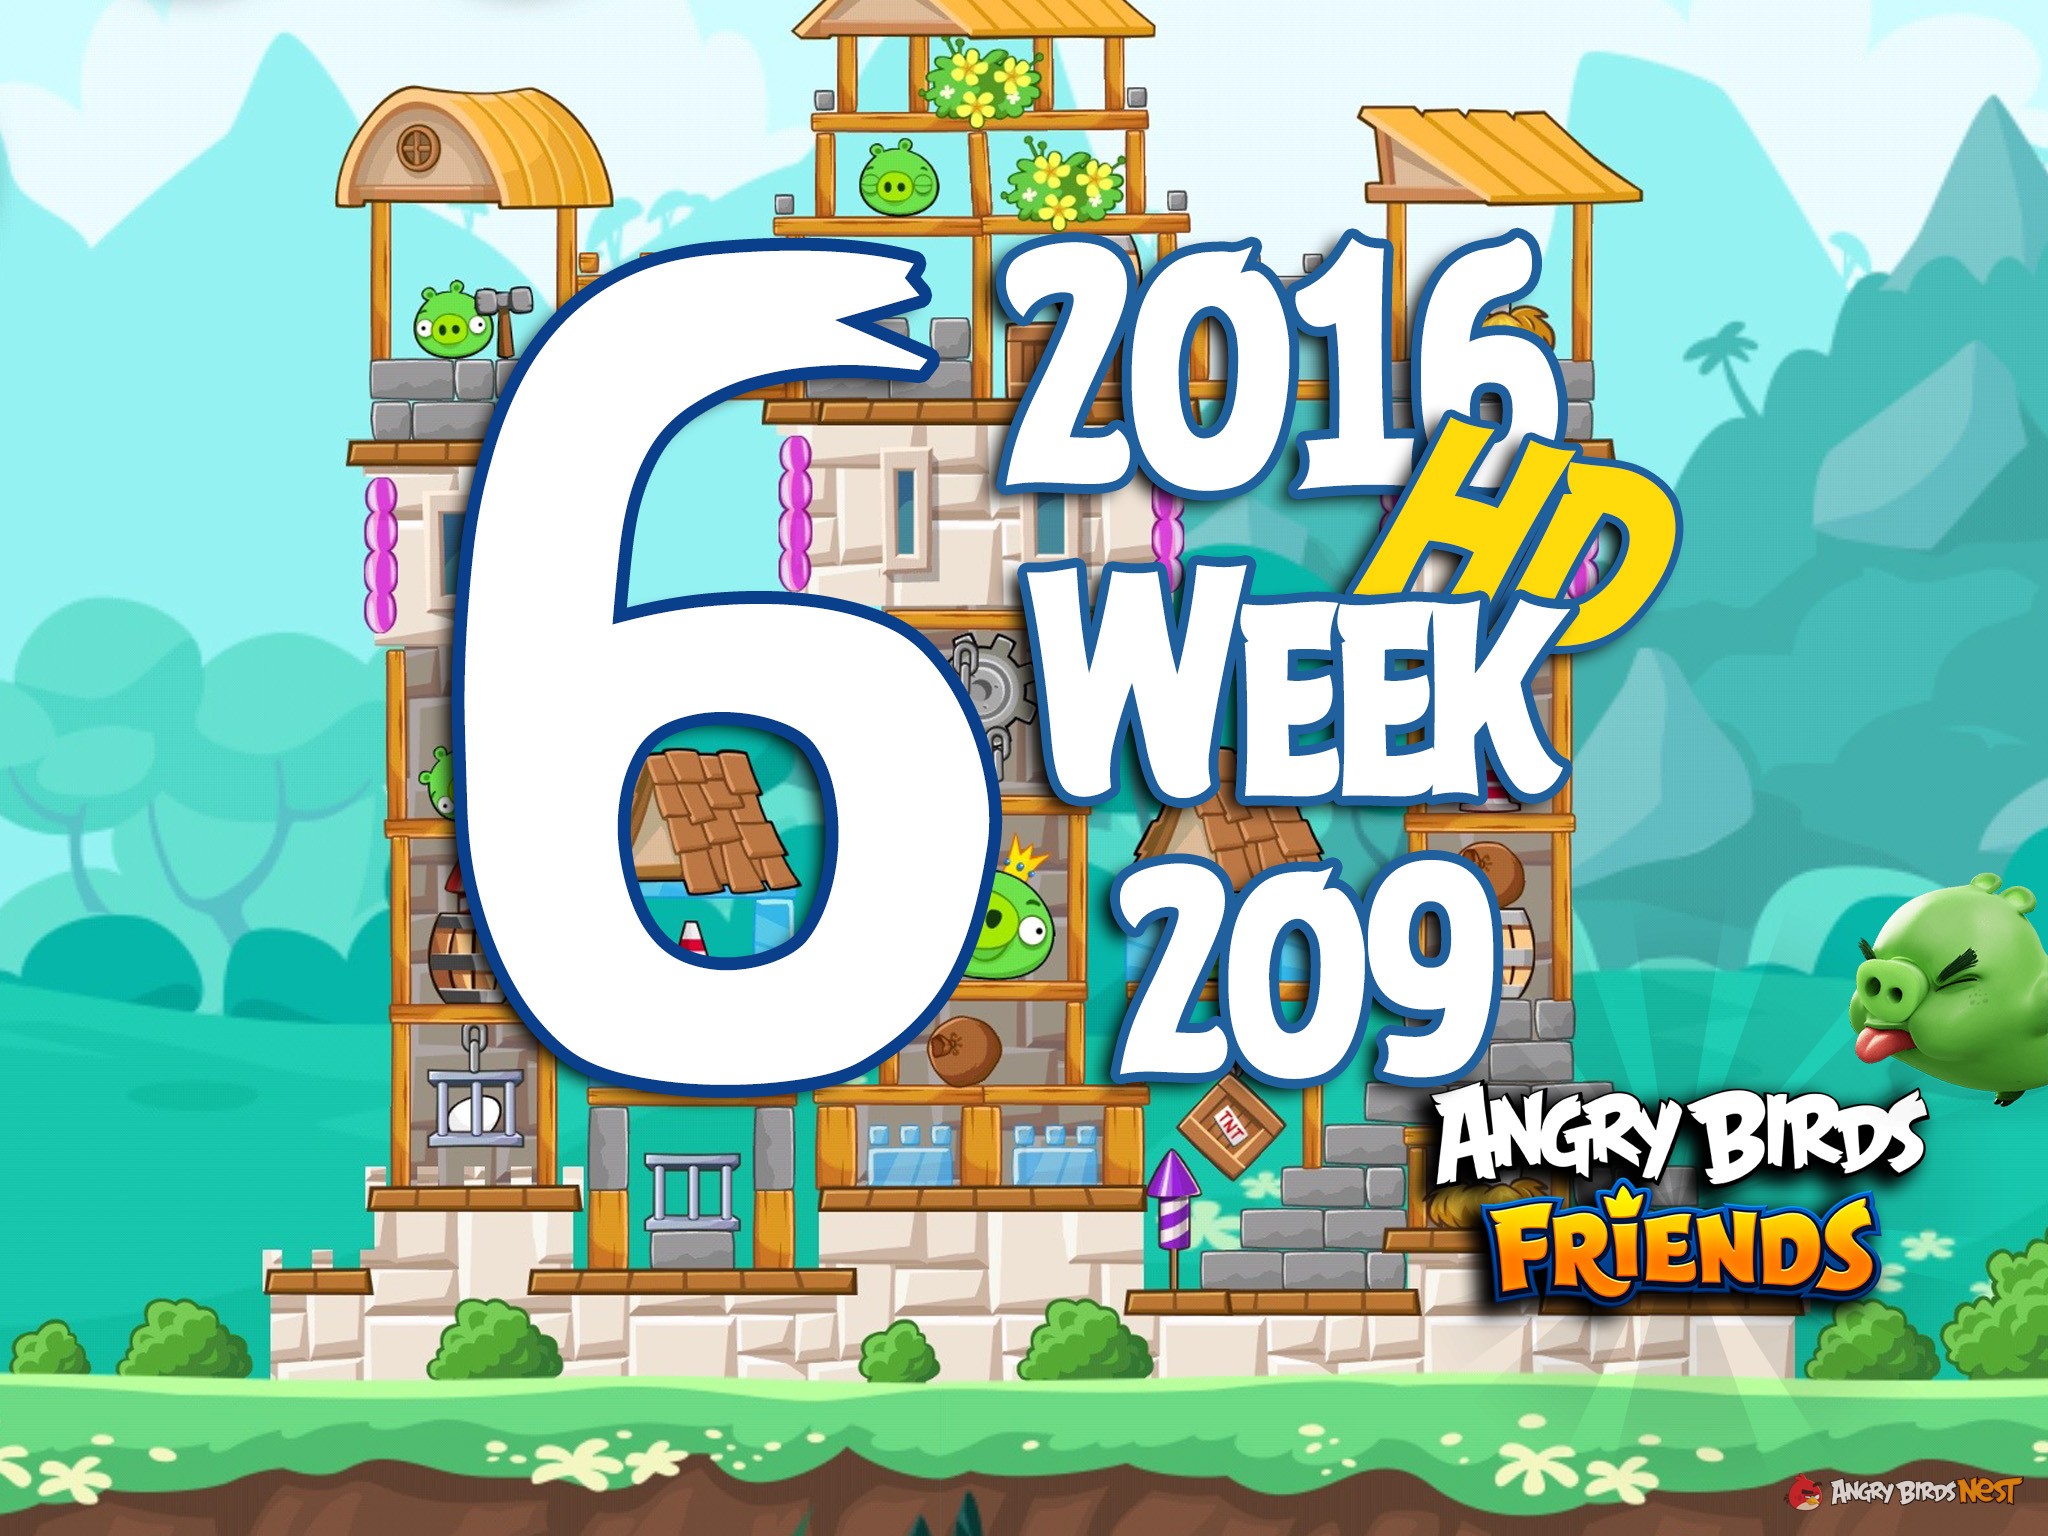 Angry Birds Friends Tournament Level 6 Week 209 Walkthrough | May 19th 2016